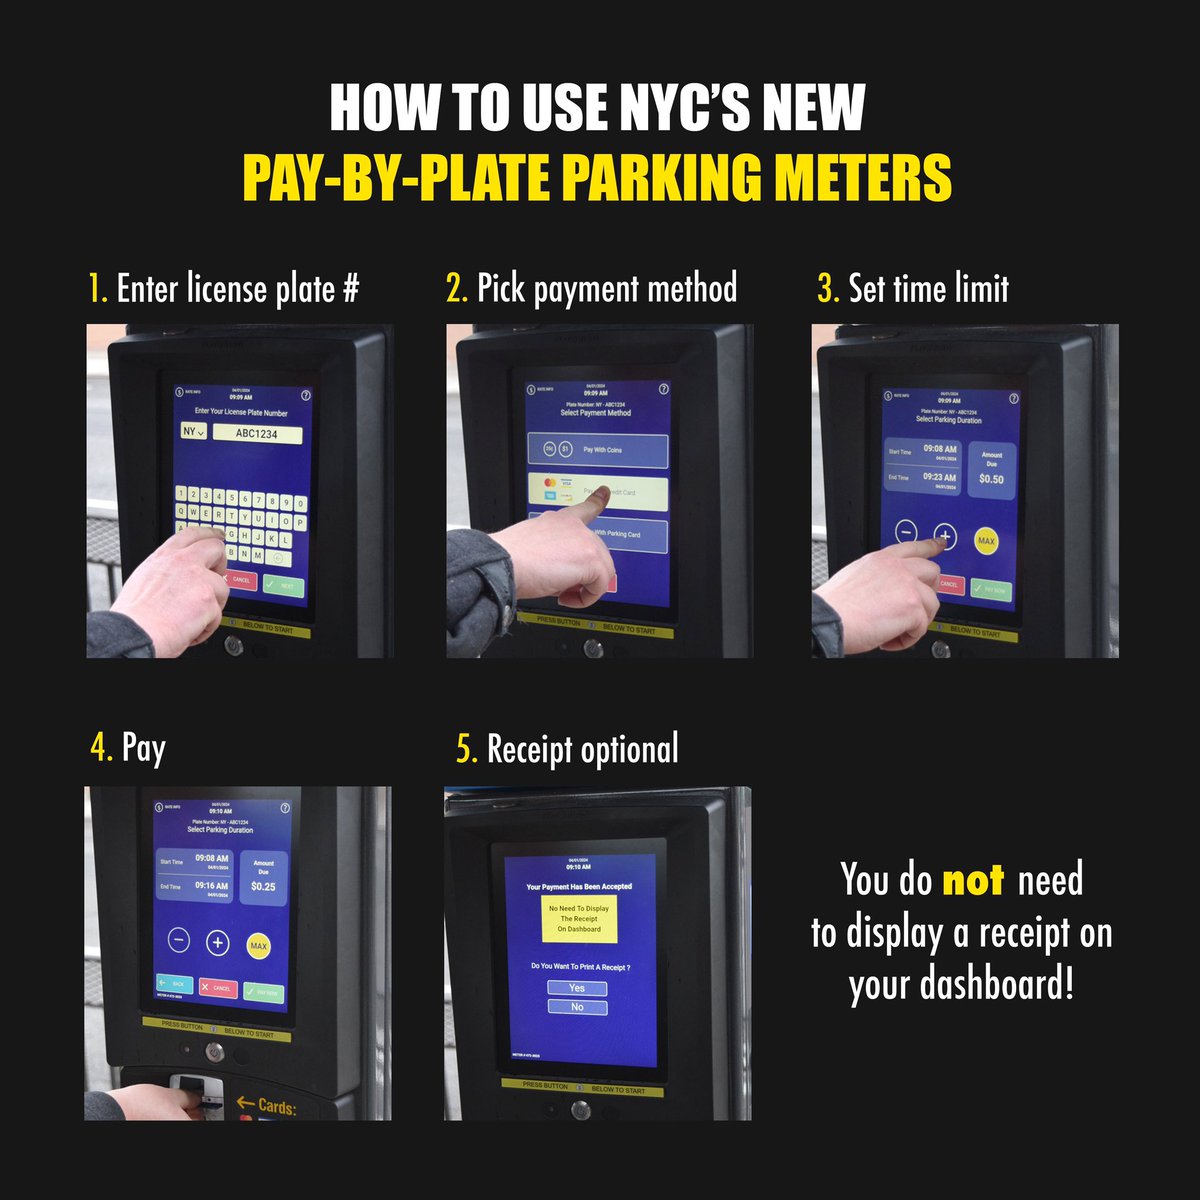 No more displaying paper receipts on your dashboard for short-term parking!   Rolling out next month, NYC’s new pay-by-plate parking meters are easier to use and will save enough paper each year to stretch from NYC to LA.   More info at nyc.gov/paythemeter